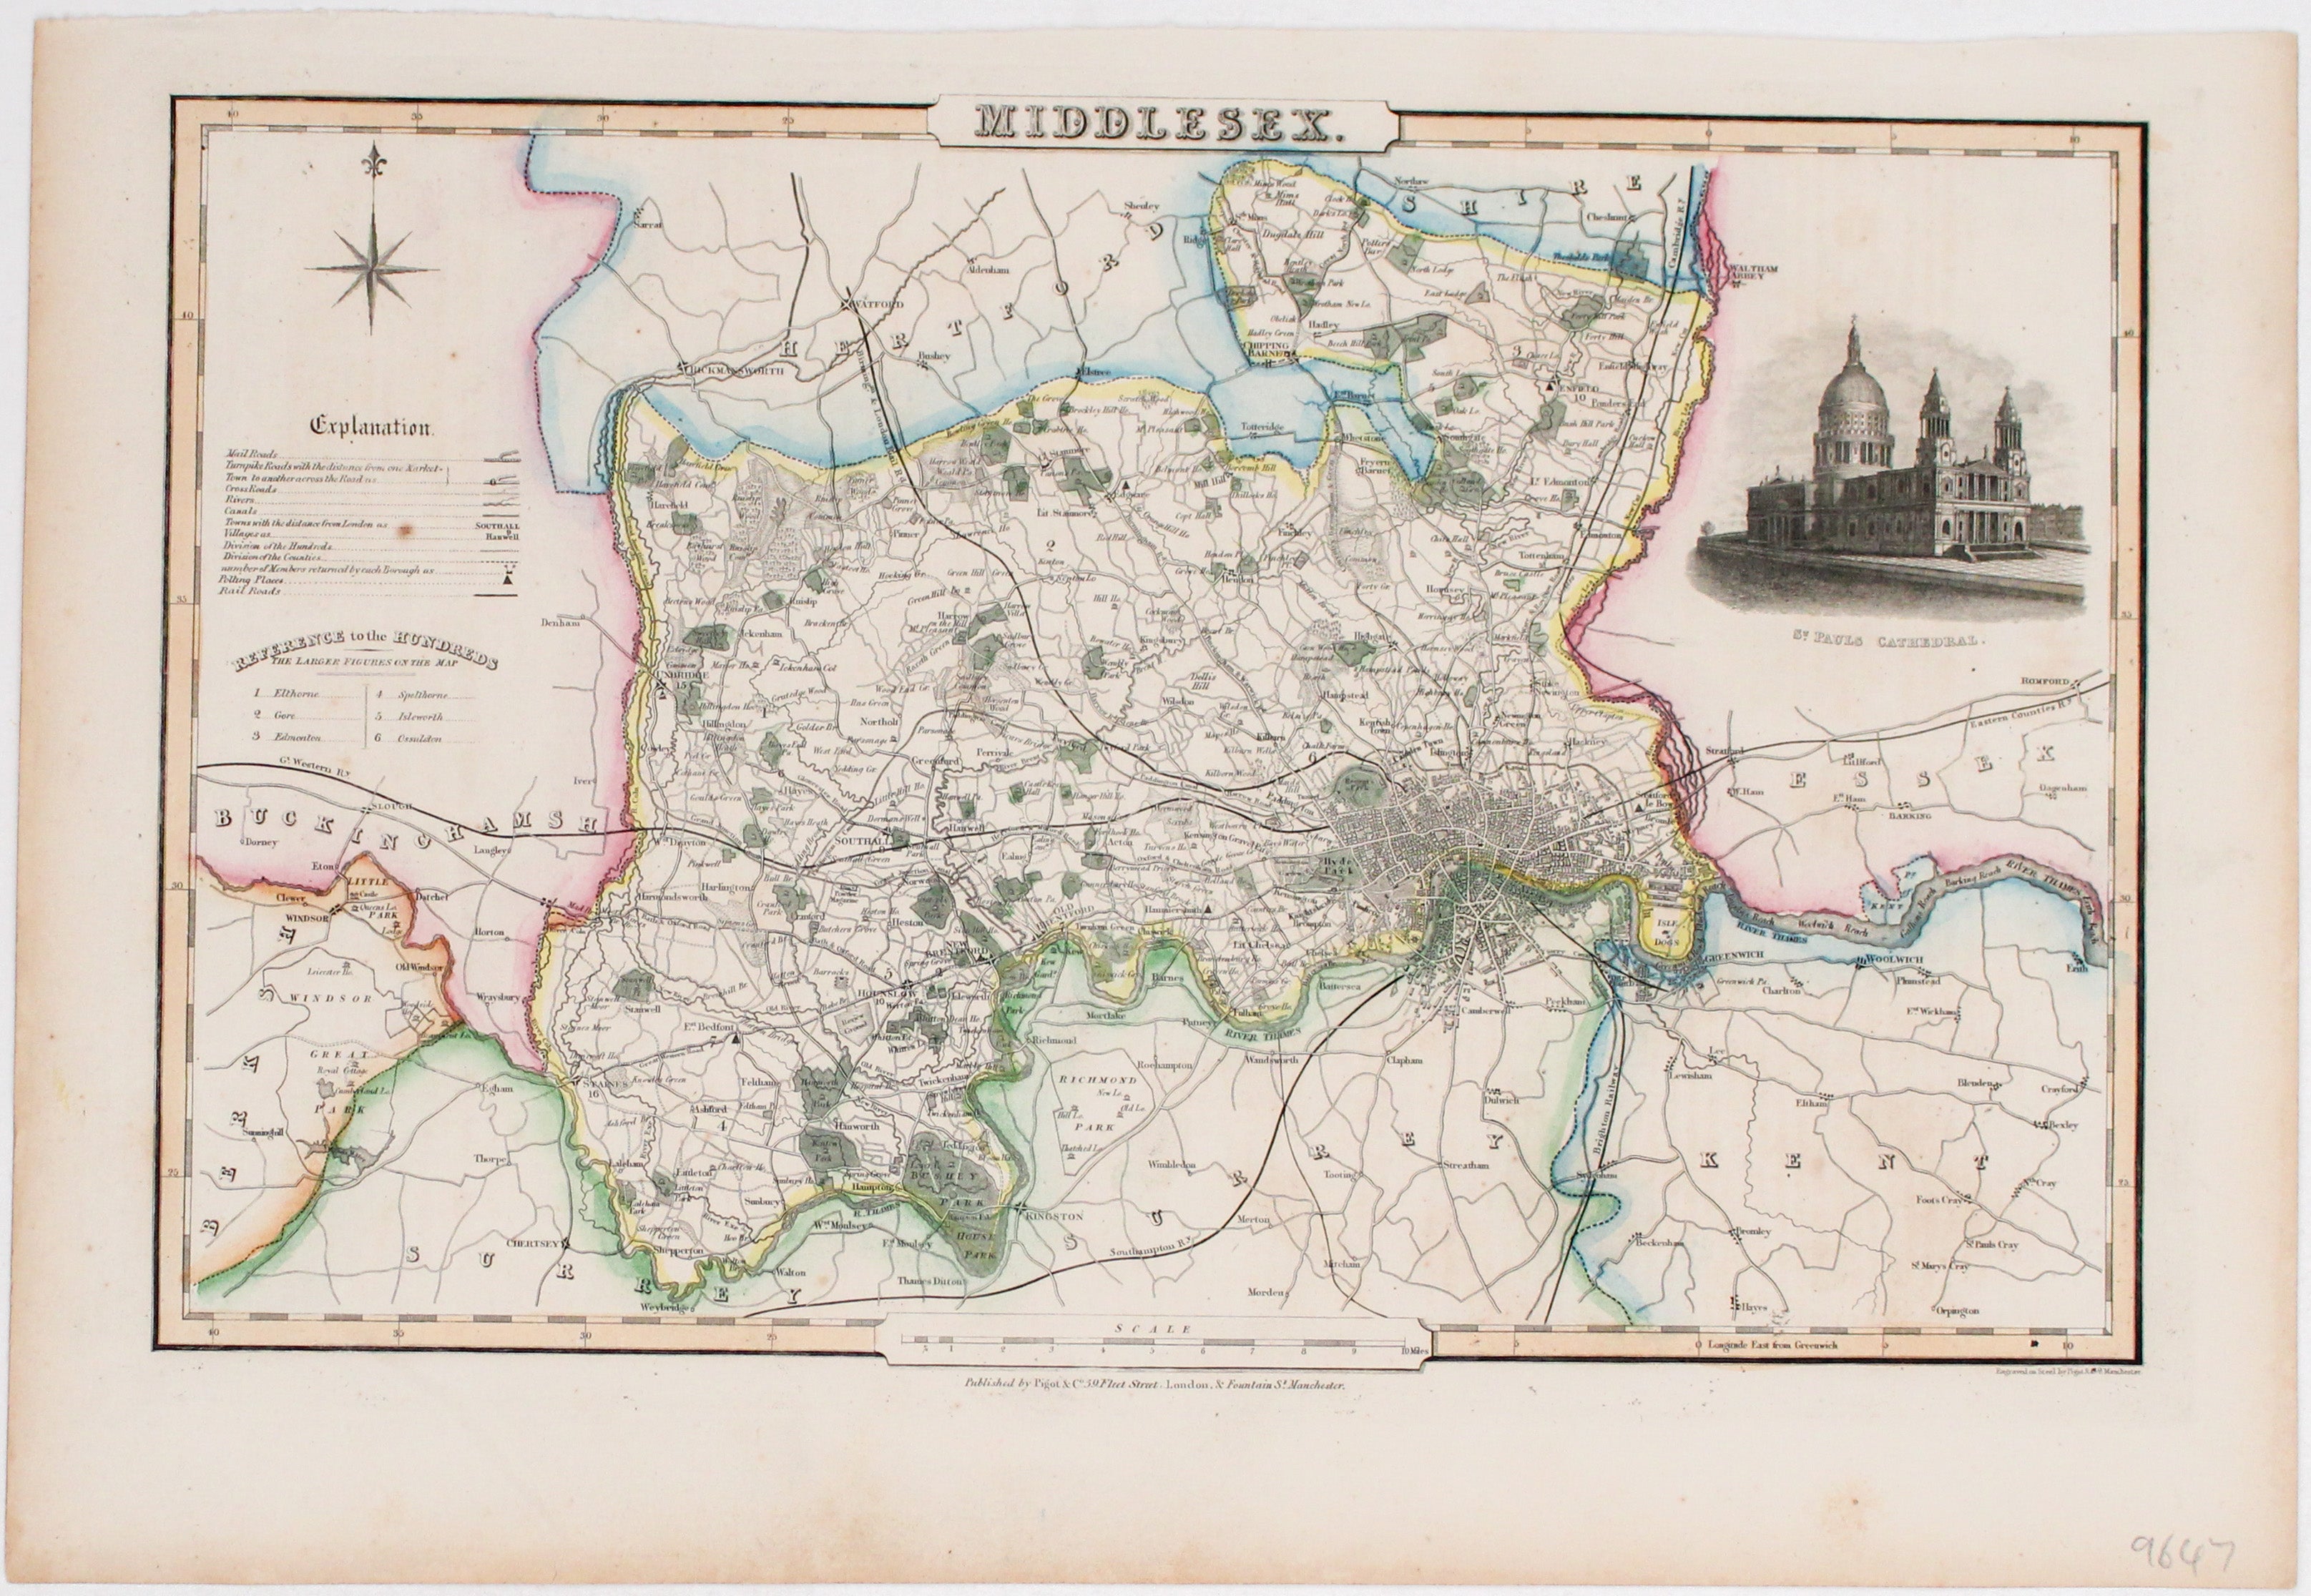 Pigot's Map of Middlesex